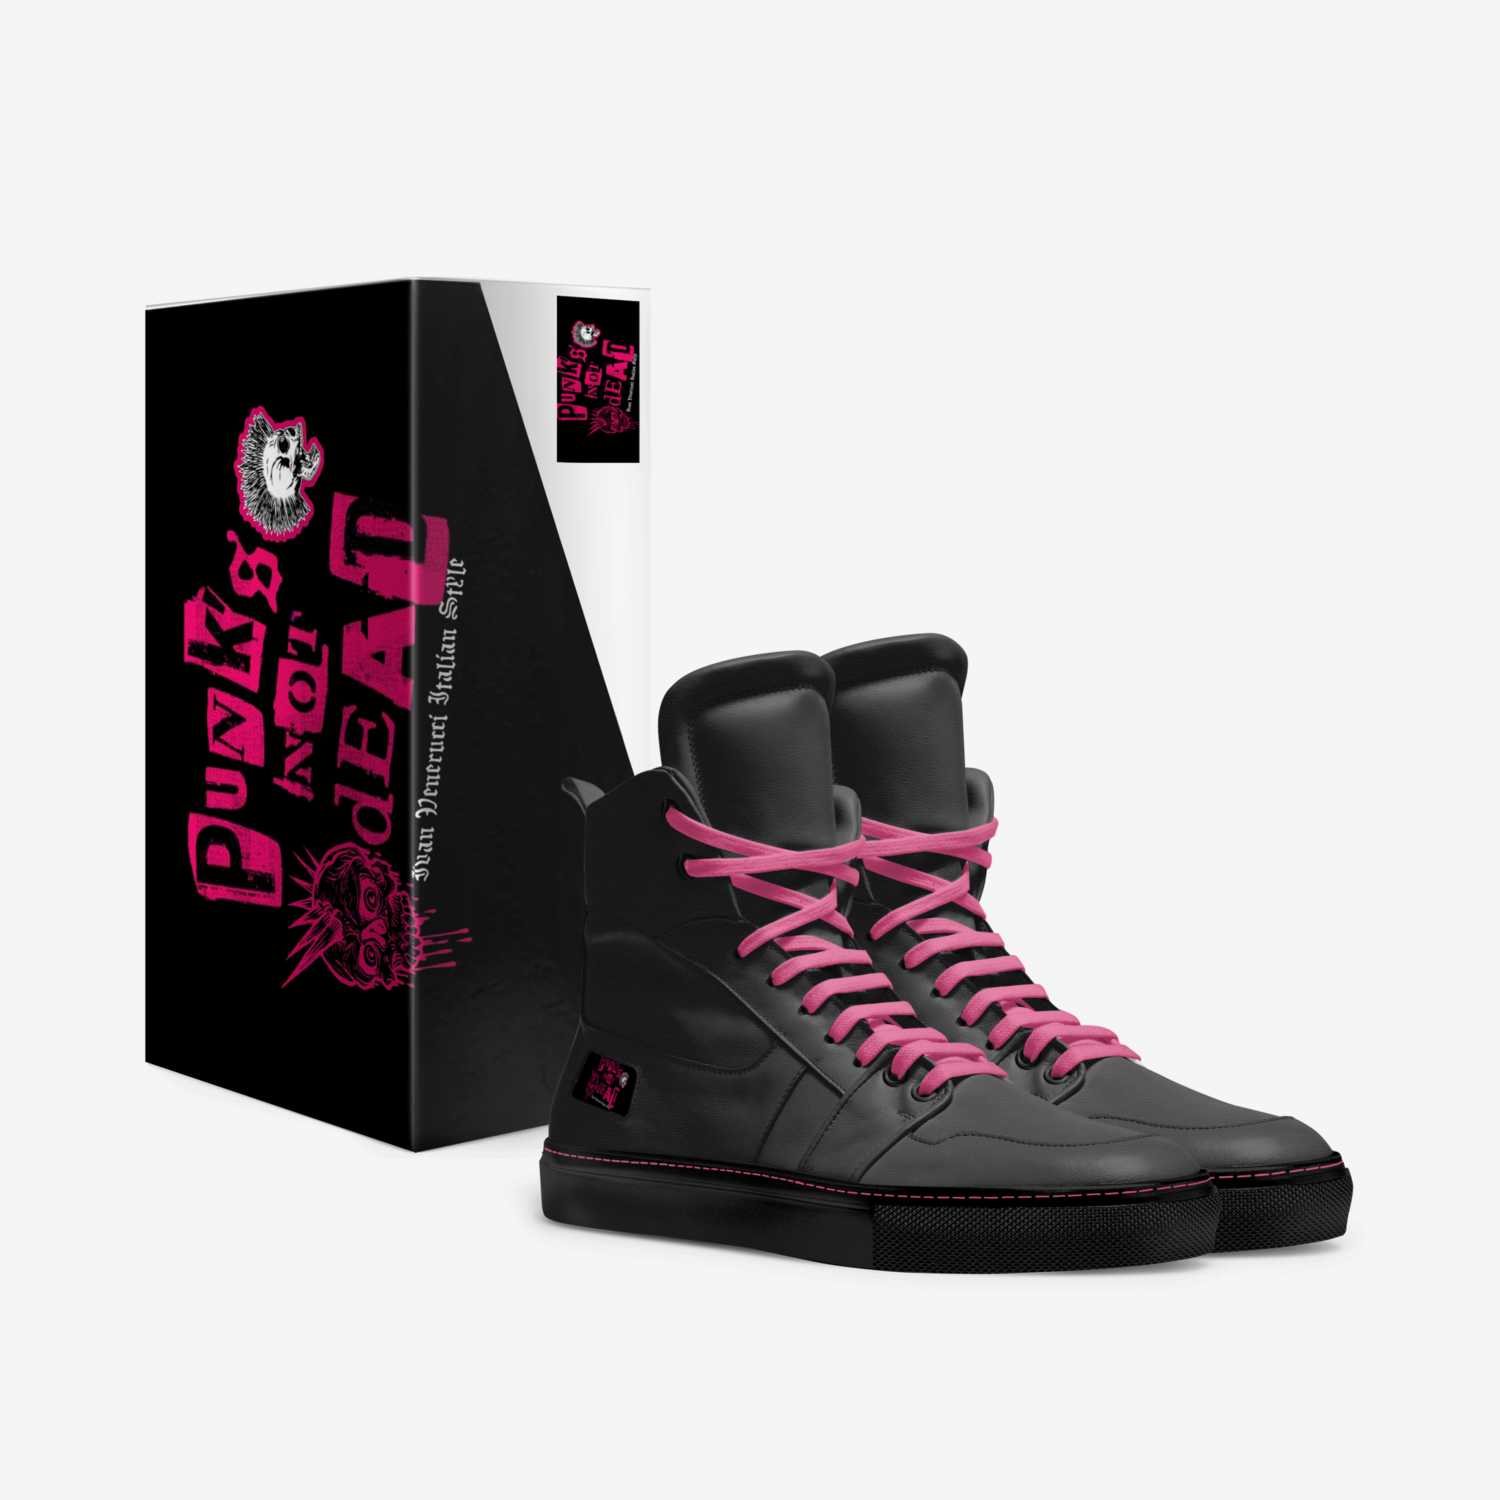 Punks not dead custom made in Italy shoes by Ivan Venerucci | Box view